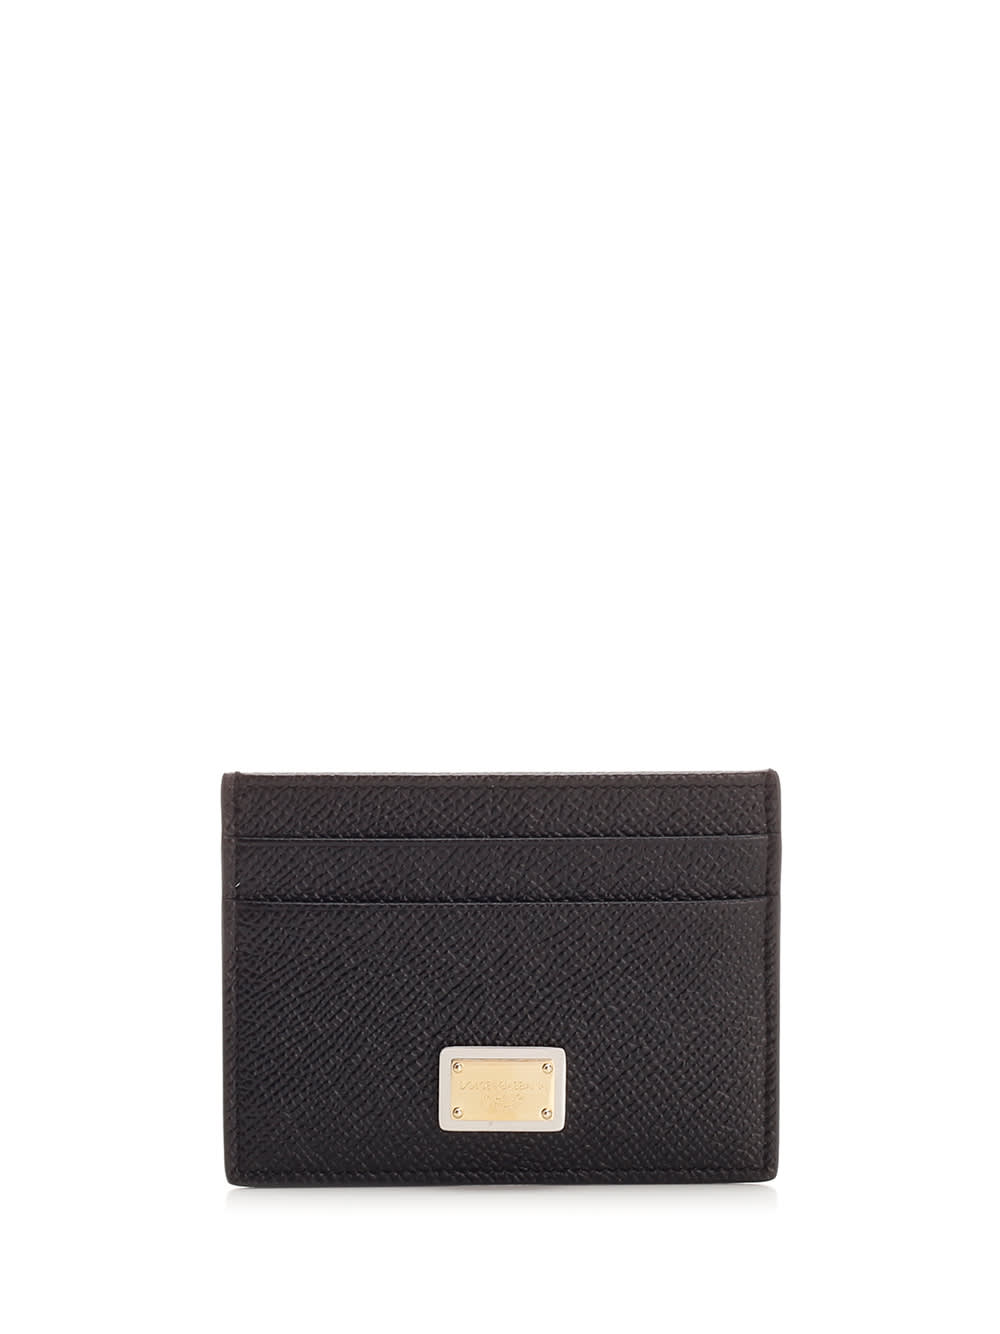 Dolce & Gabbana Card Holder With Tag In Nero